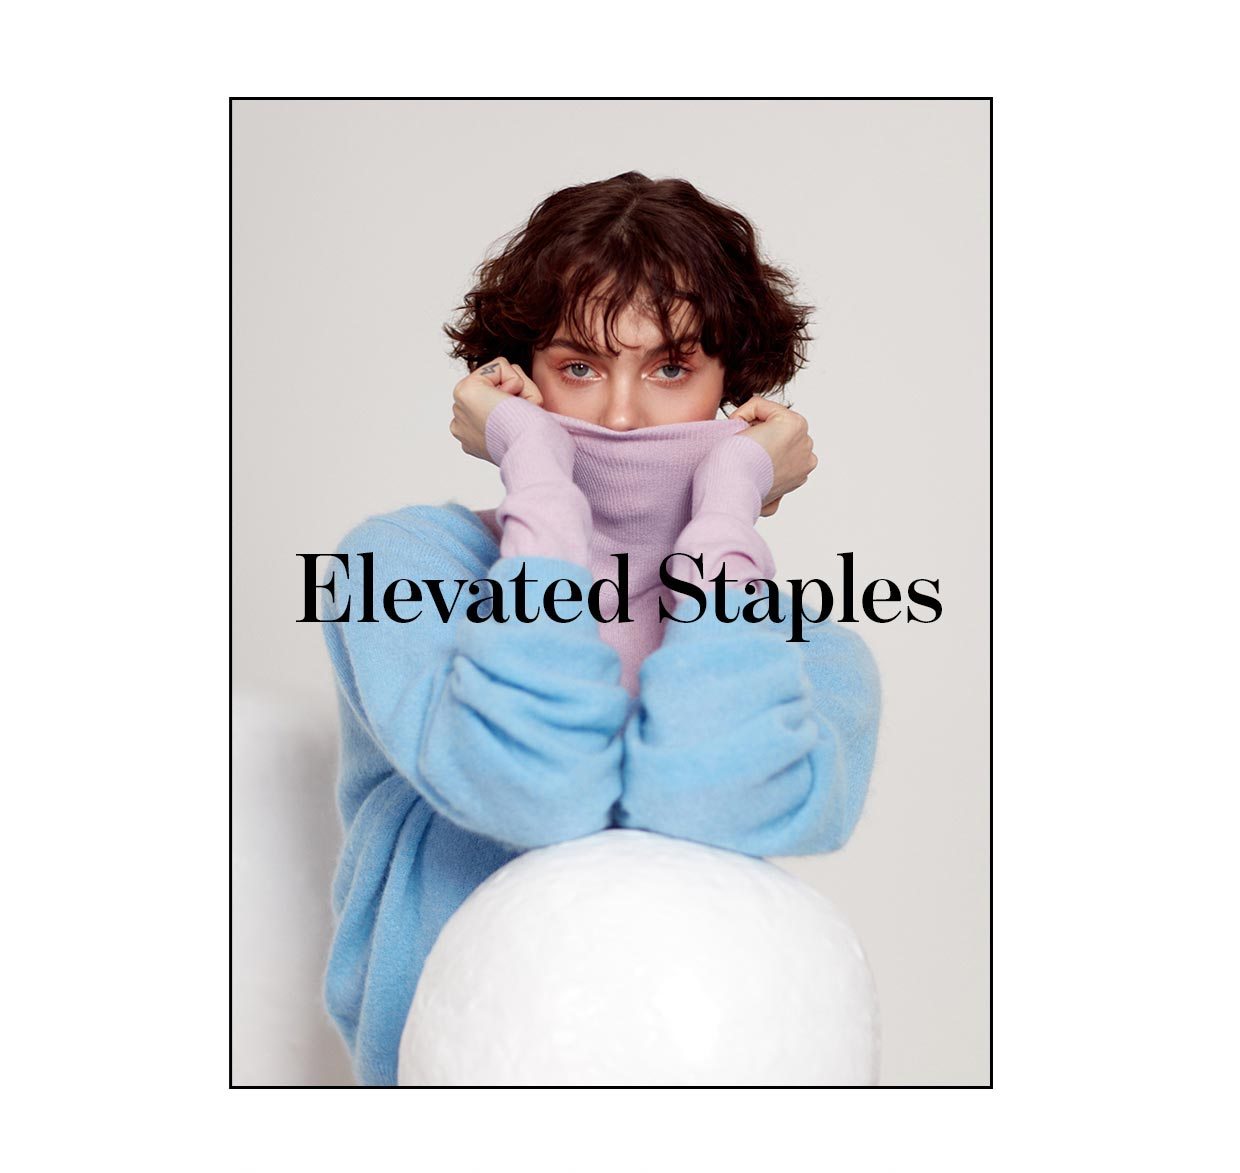 SHOP ELEVATED STAPLES